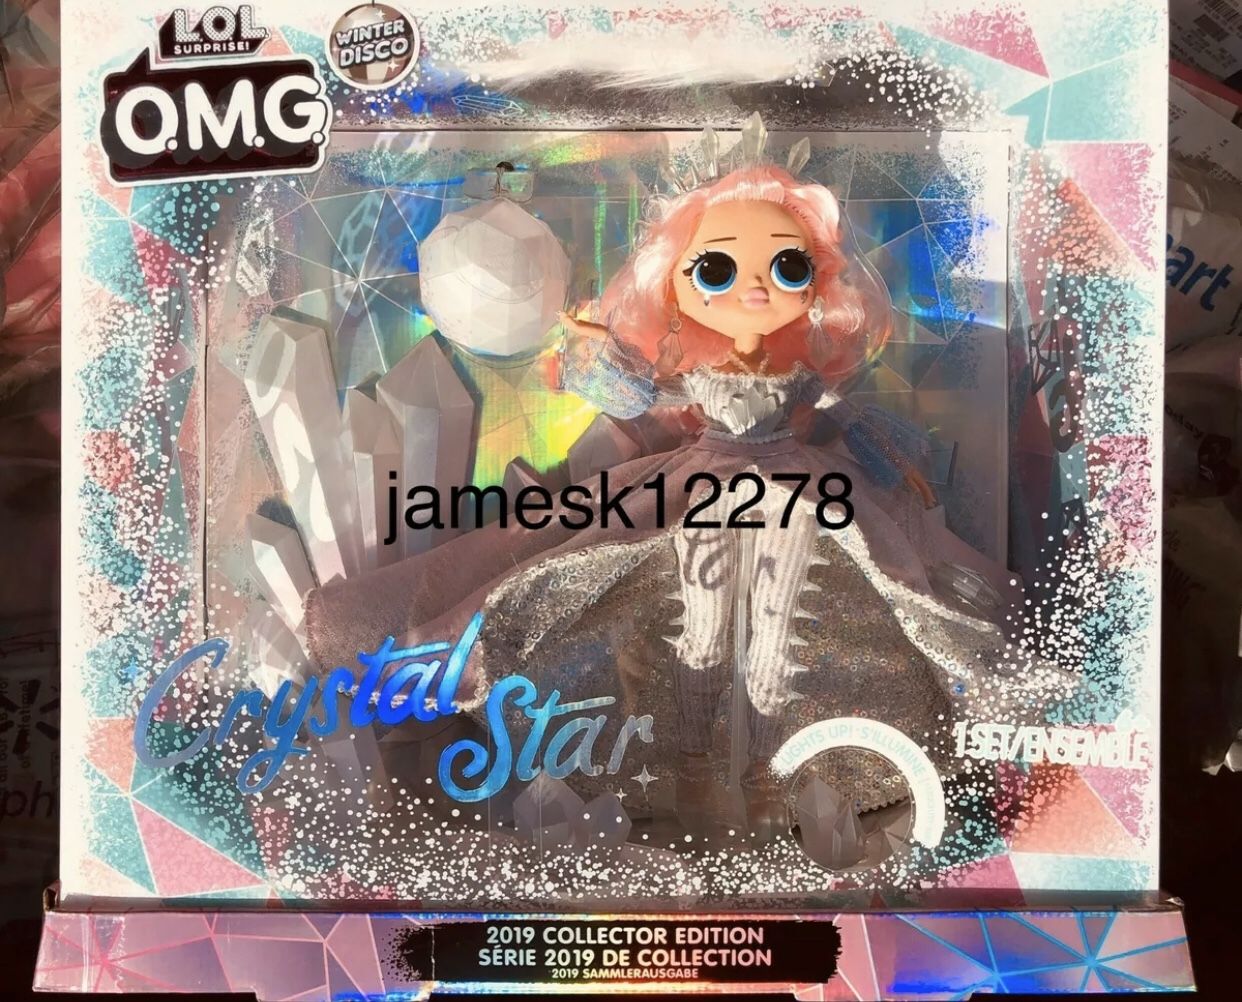 IN HAND LOL Surprise! OMG Crystal Star 2019 Collector Edition Winter Disco